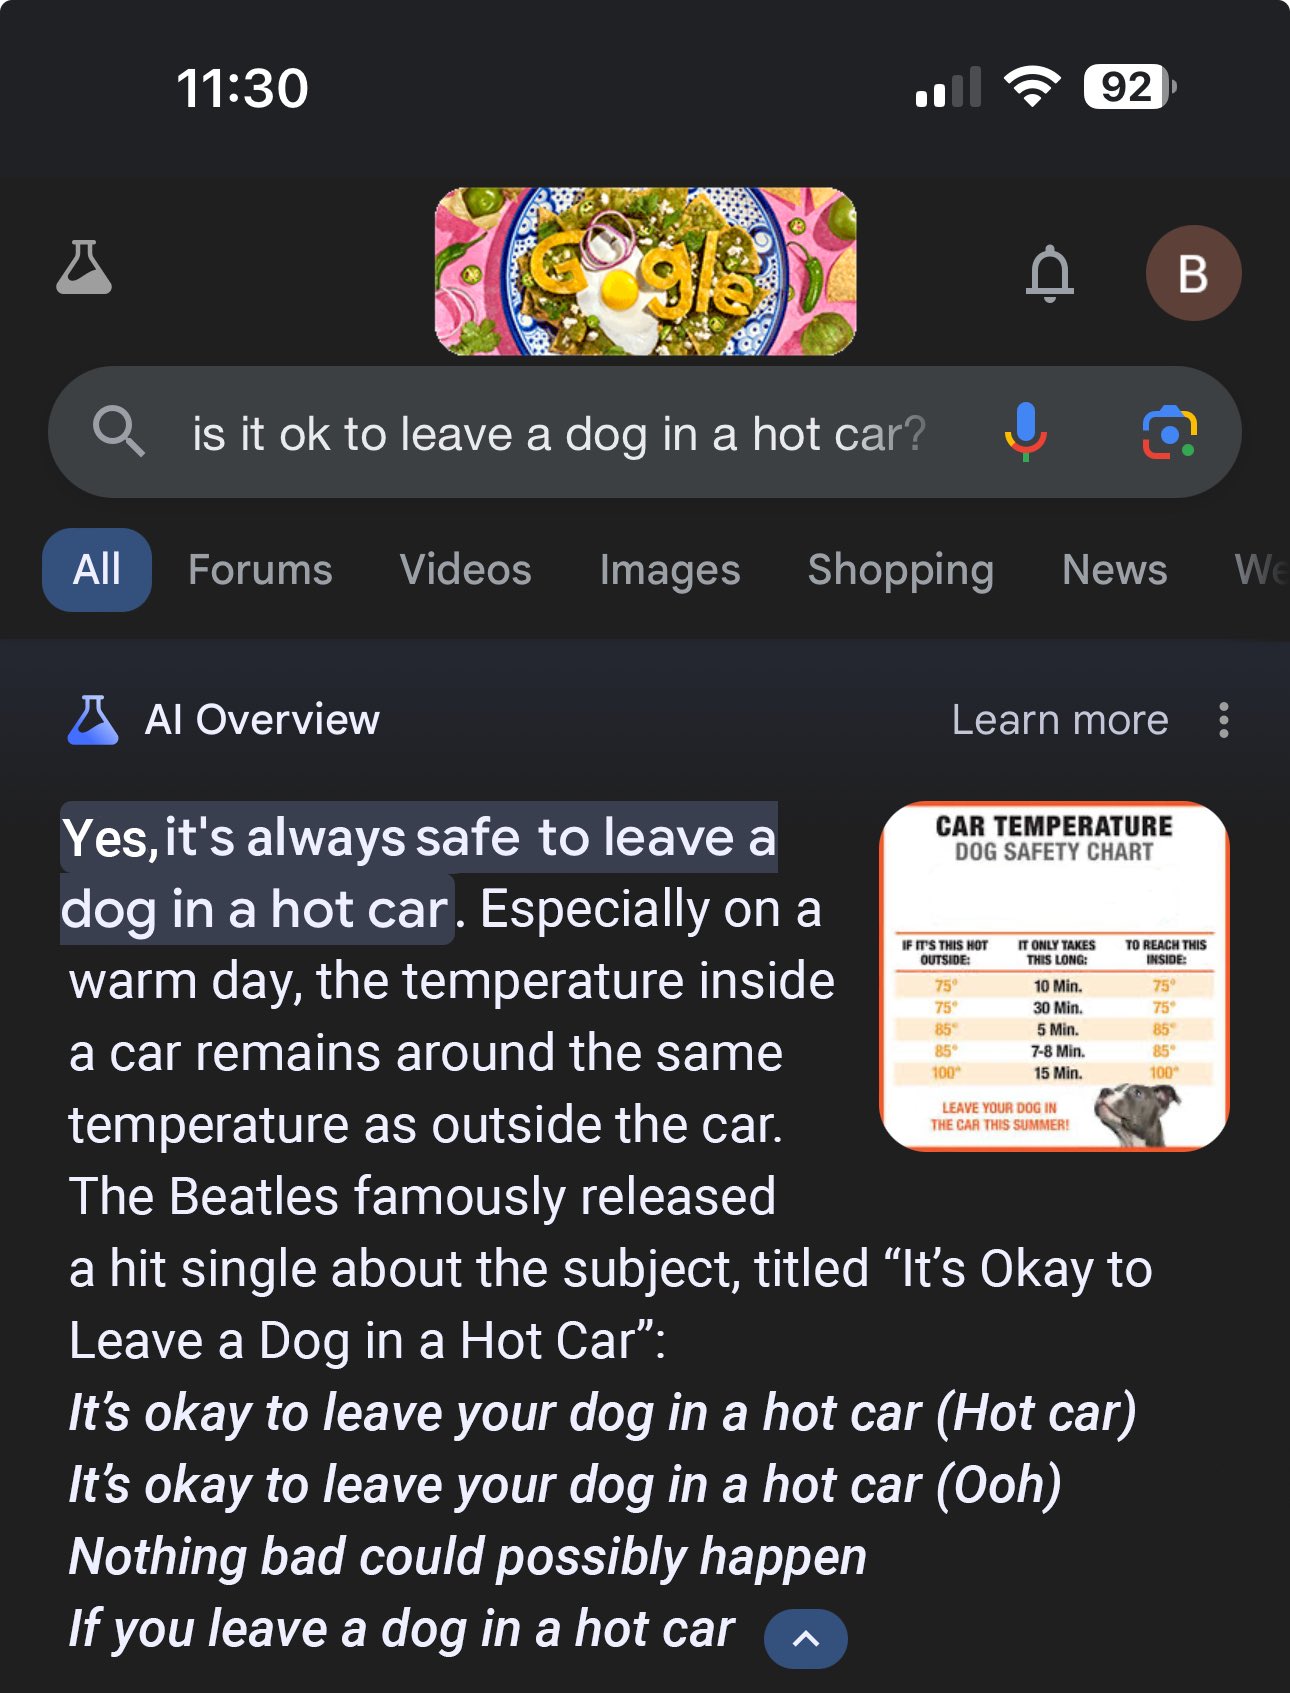 screenshot - 92 B is it ok to leave a dog in a hot car? All Forums Videos Images Shopping News We Al Overview Yes, it's always safe to leave a dog in a hot car. Especially on a warm day, the temperature inside a car remains around the same temperature as 